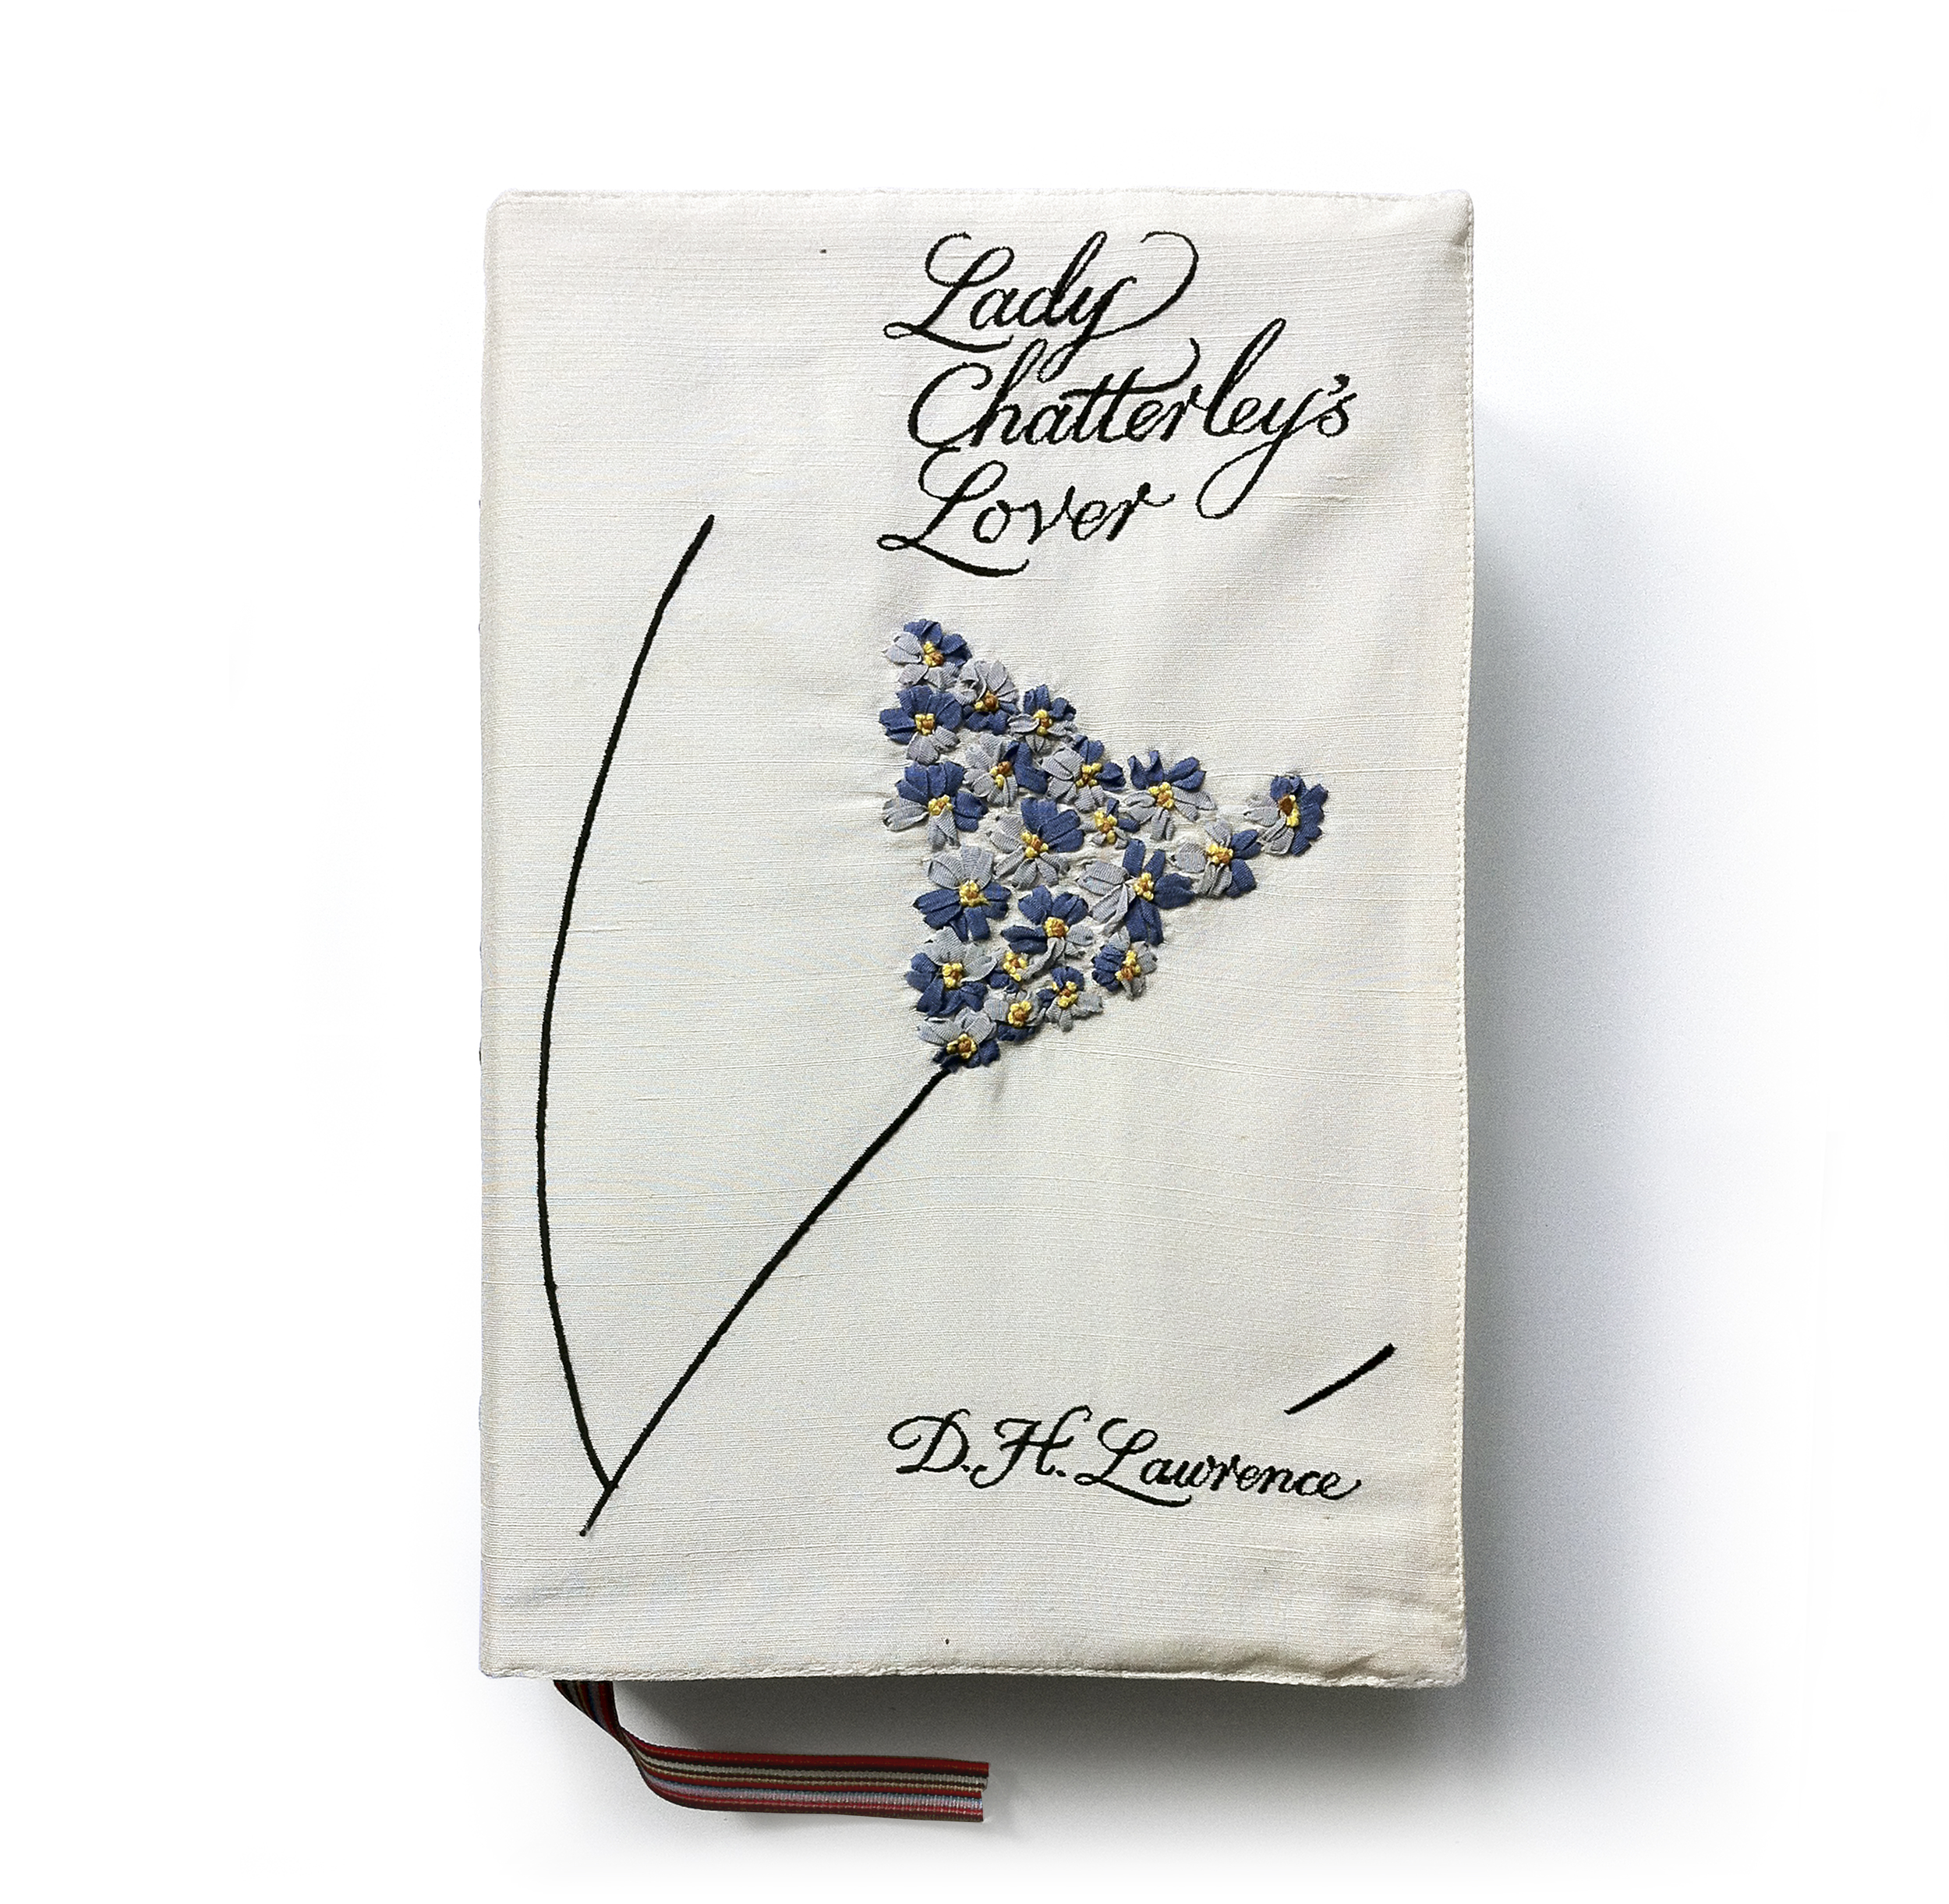  Lady Chatterley's Lover by D. H. Lawrence (Penguin Classics 60th anniversary hardback) - Art Direction: Paul Smith Design: Alan Aboud  &nbsp;&nbsp; 